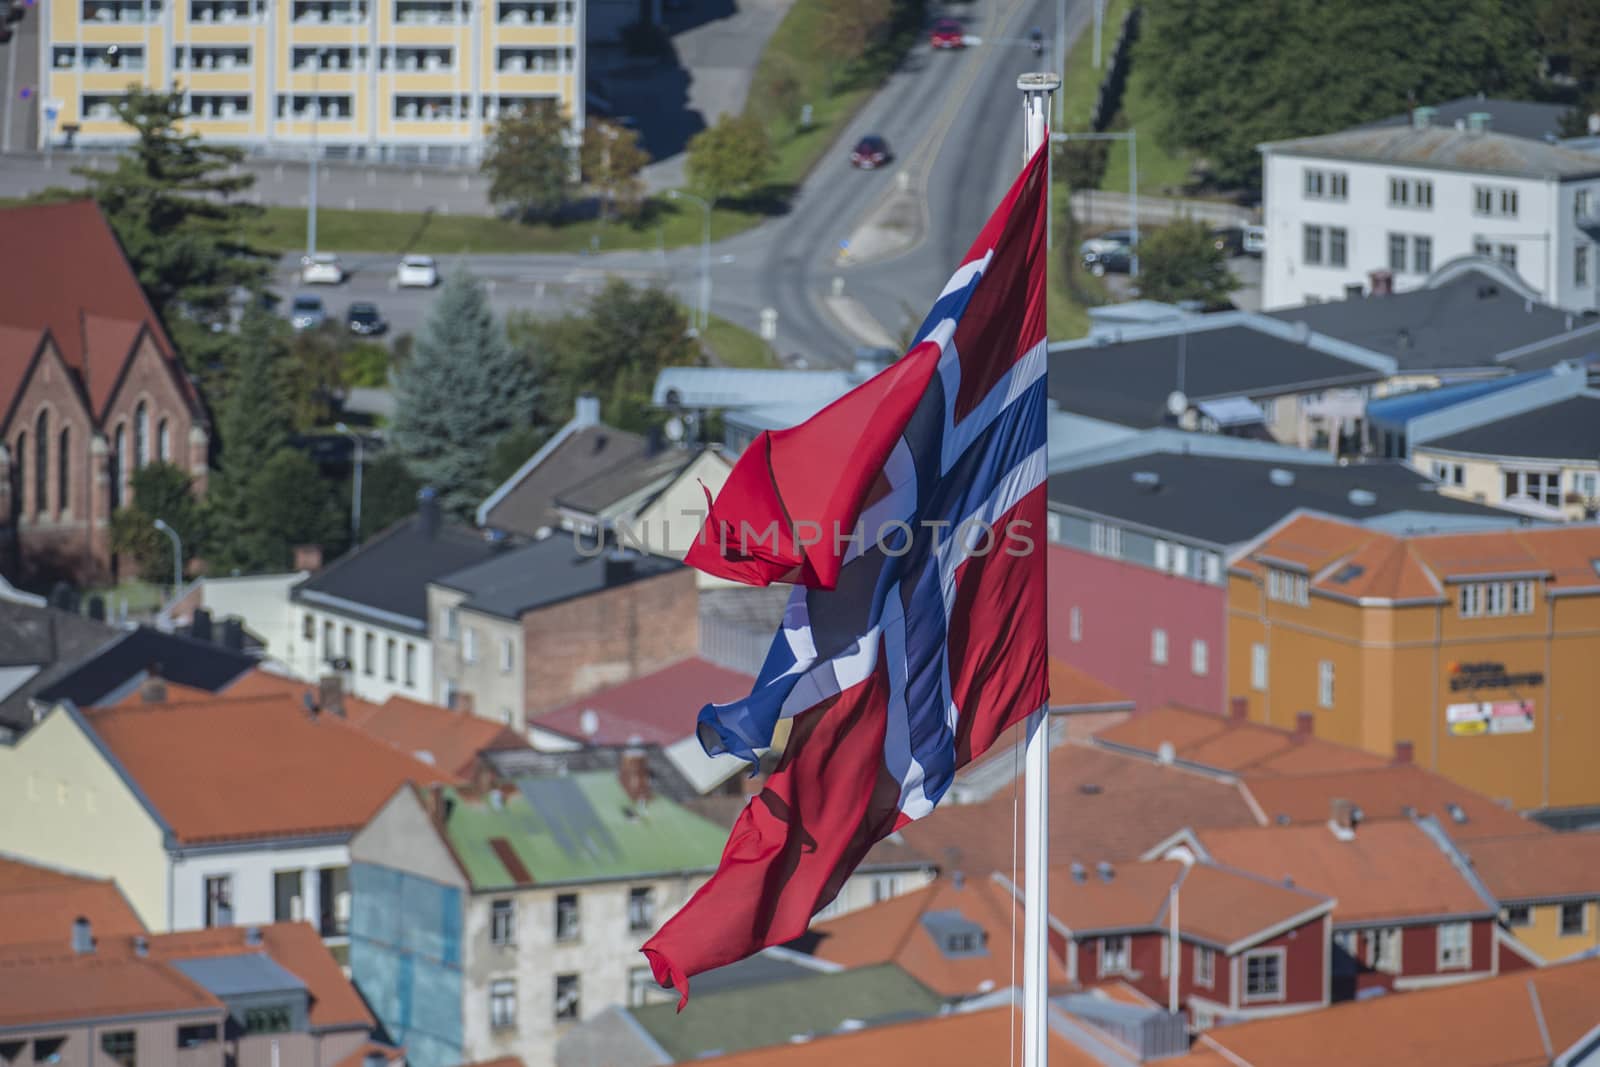 At Fredriksten fortress in Halden is it flag every day and this is the Norwegian flag.